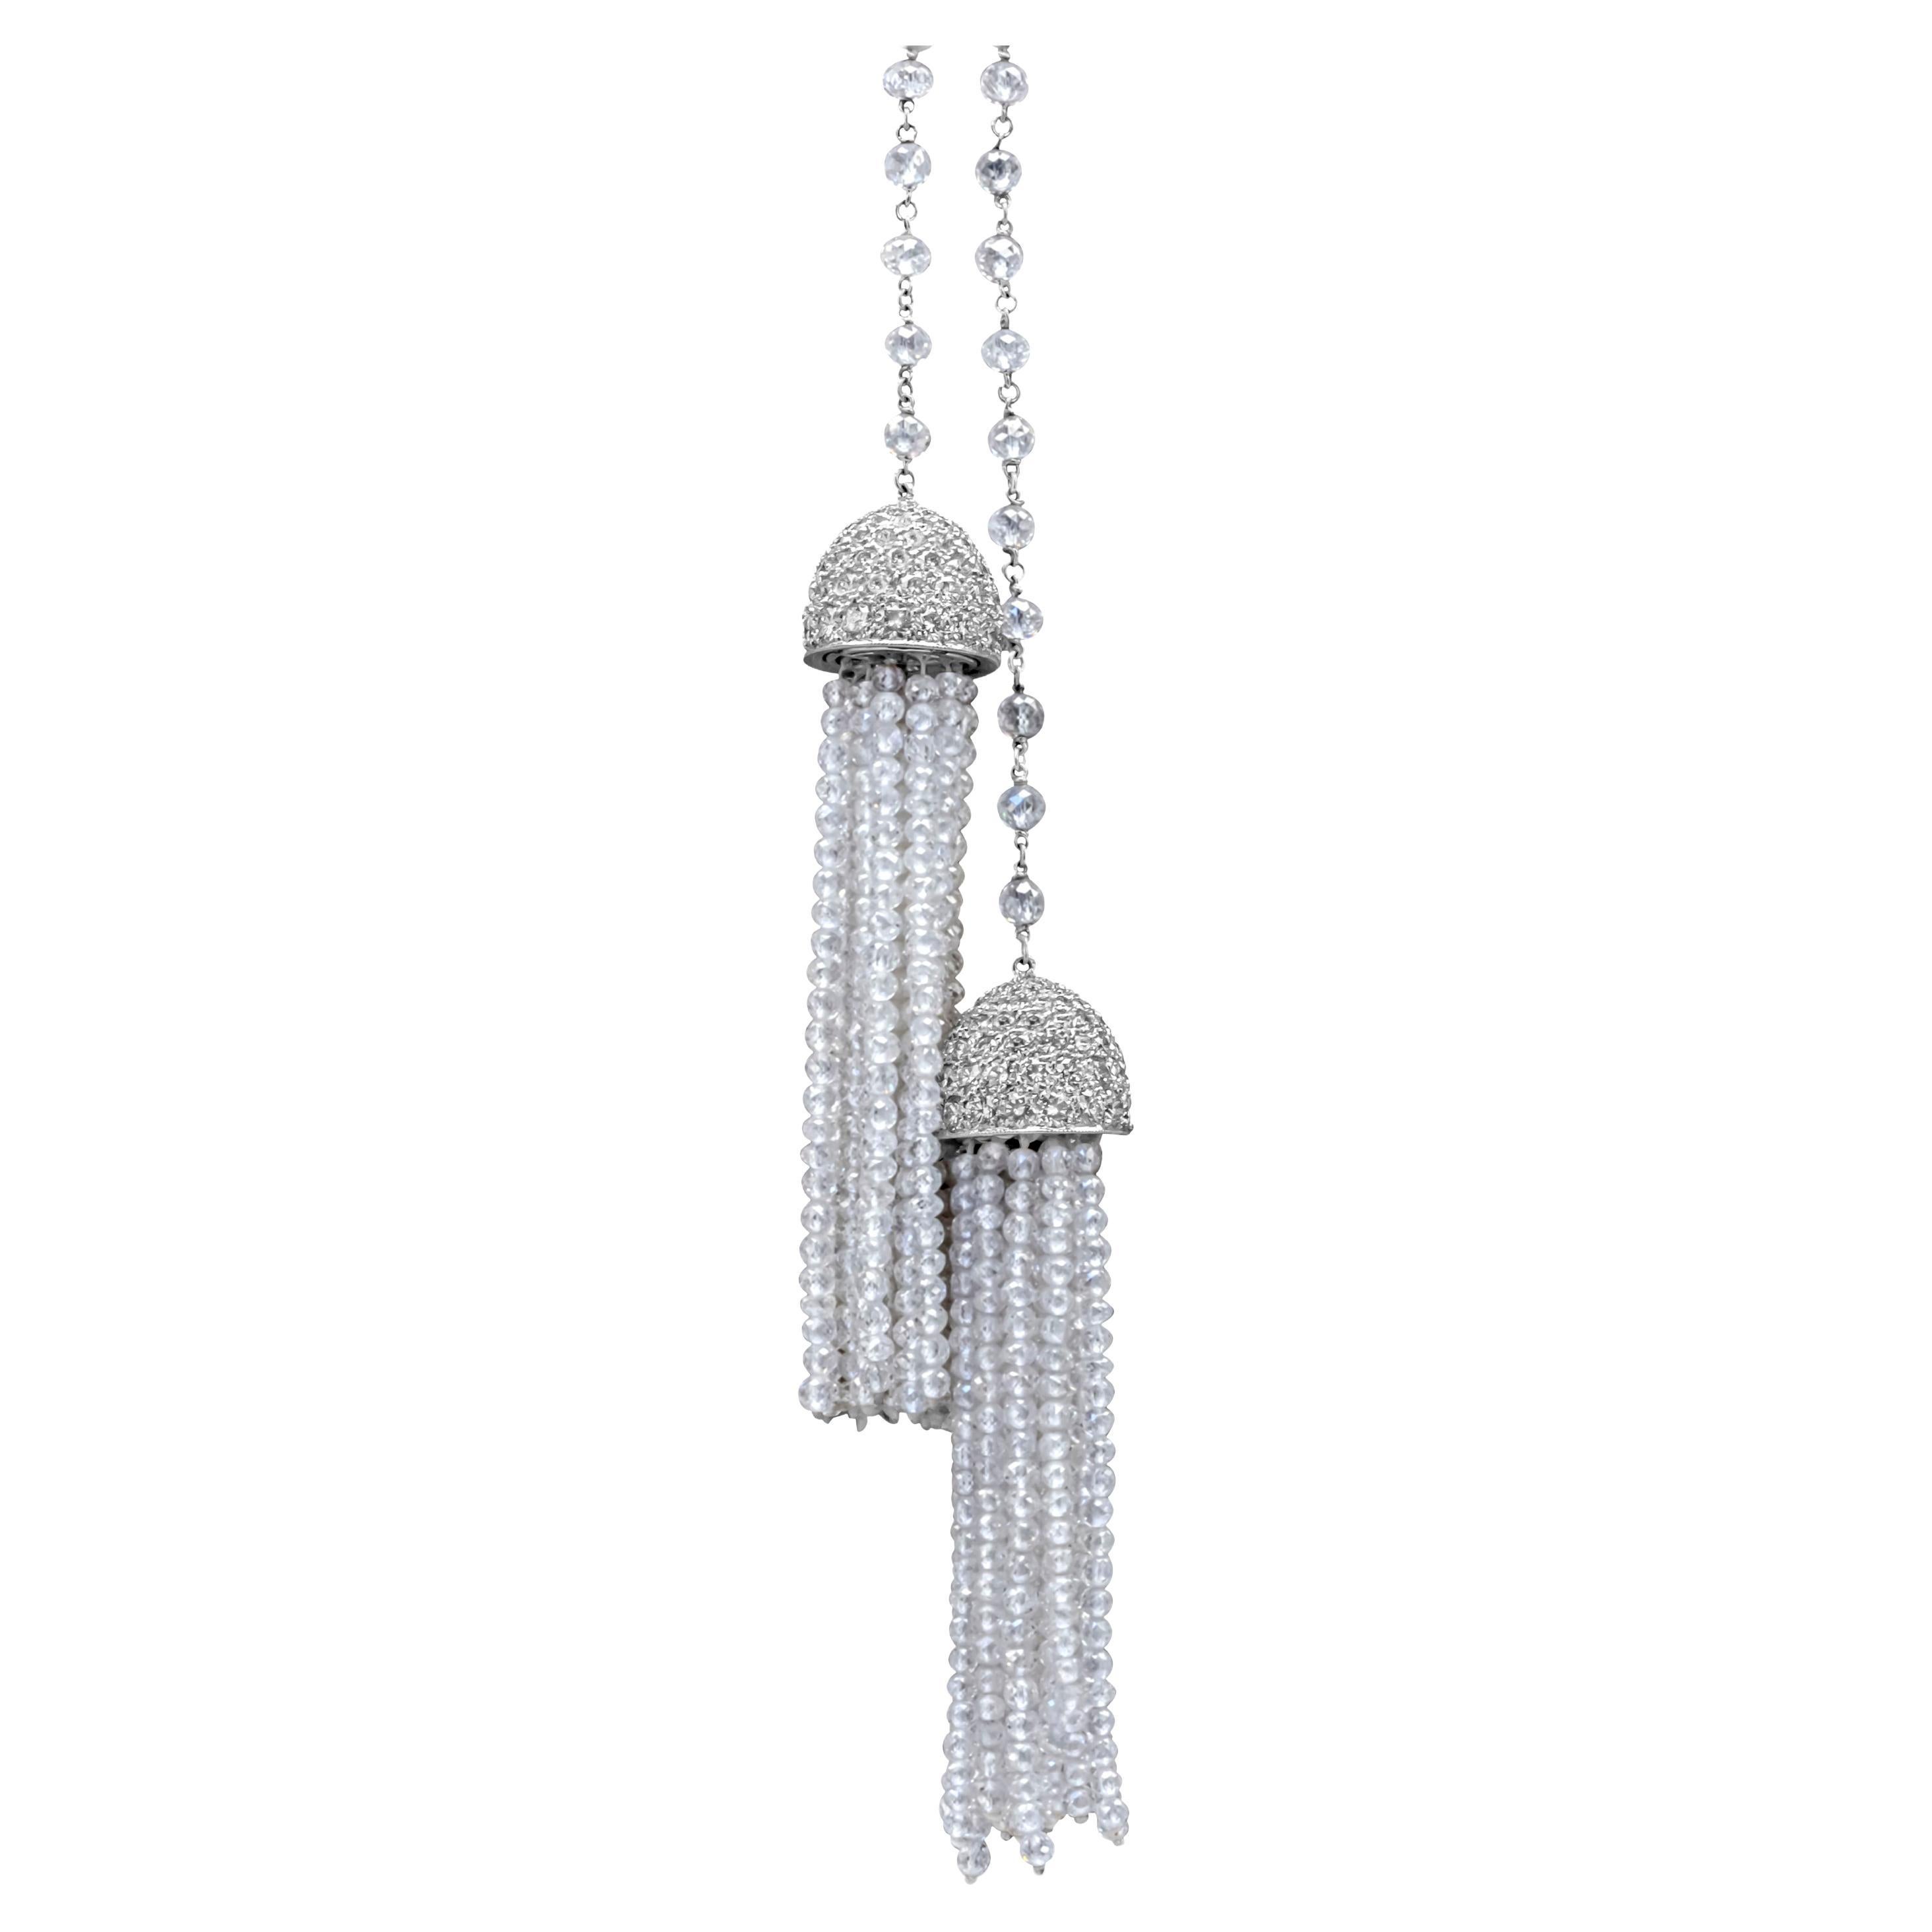 This magnificent and spectacular necklace features round brilliant Diamond-capped briolette diamond tassels, suspended from a diamond chain necklace. With a spring rings closure. This stunning diamond necklace has approximately 116.77 carats of